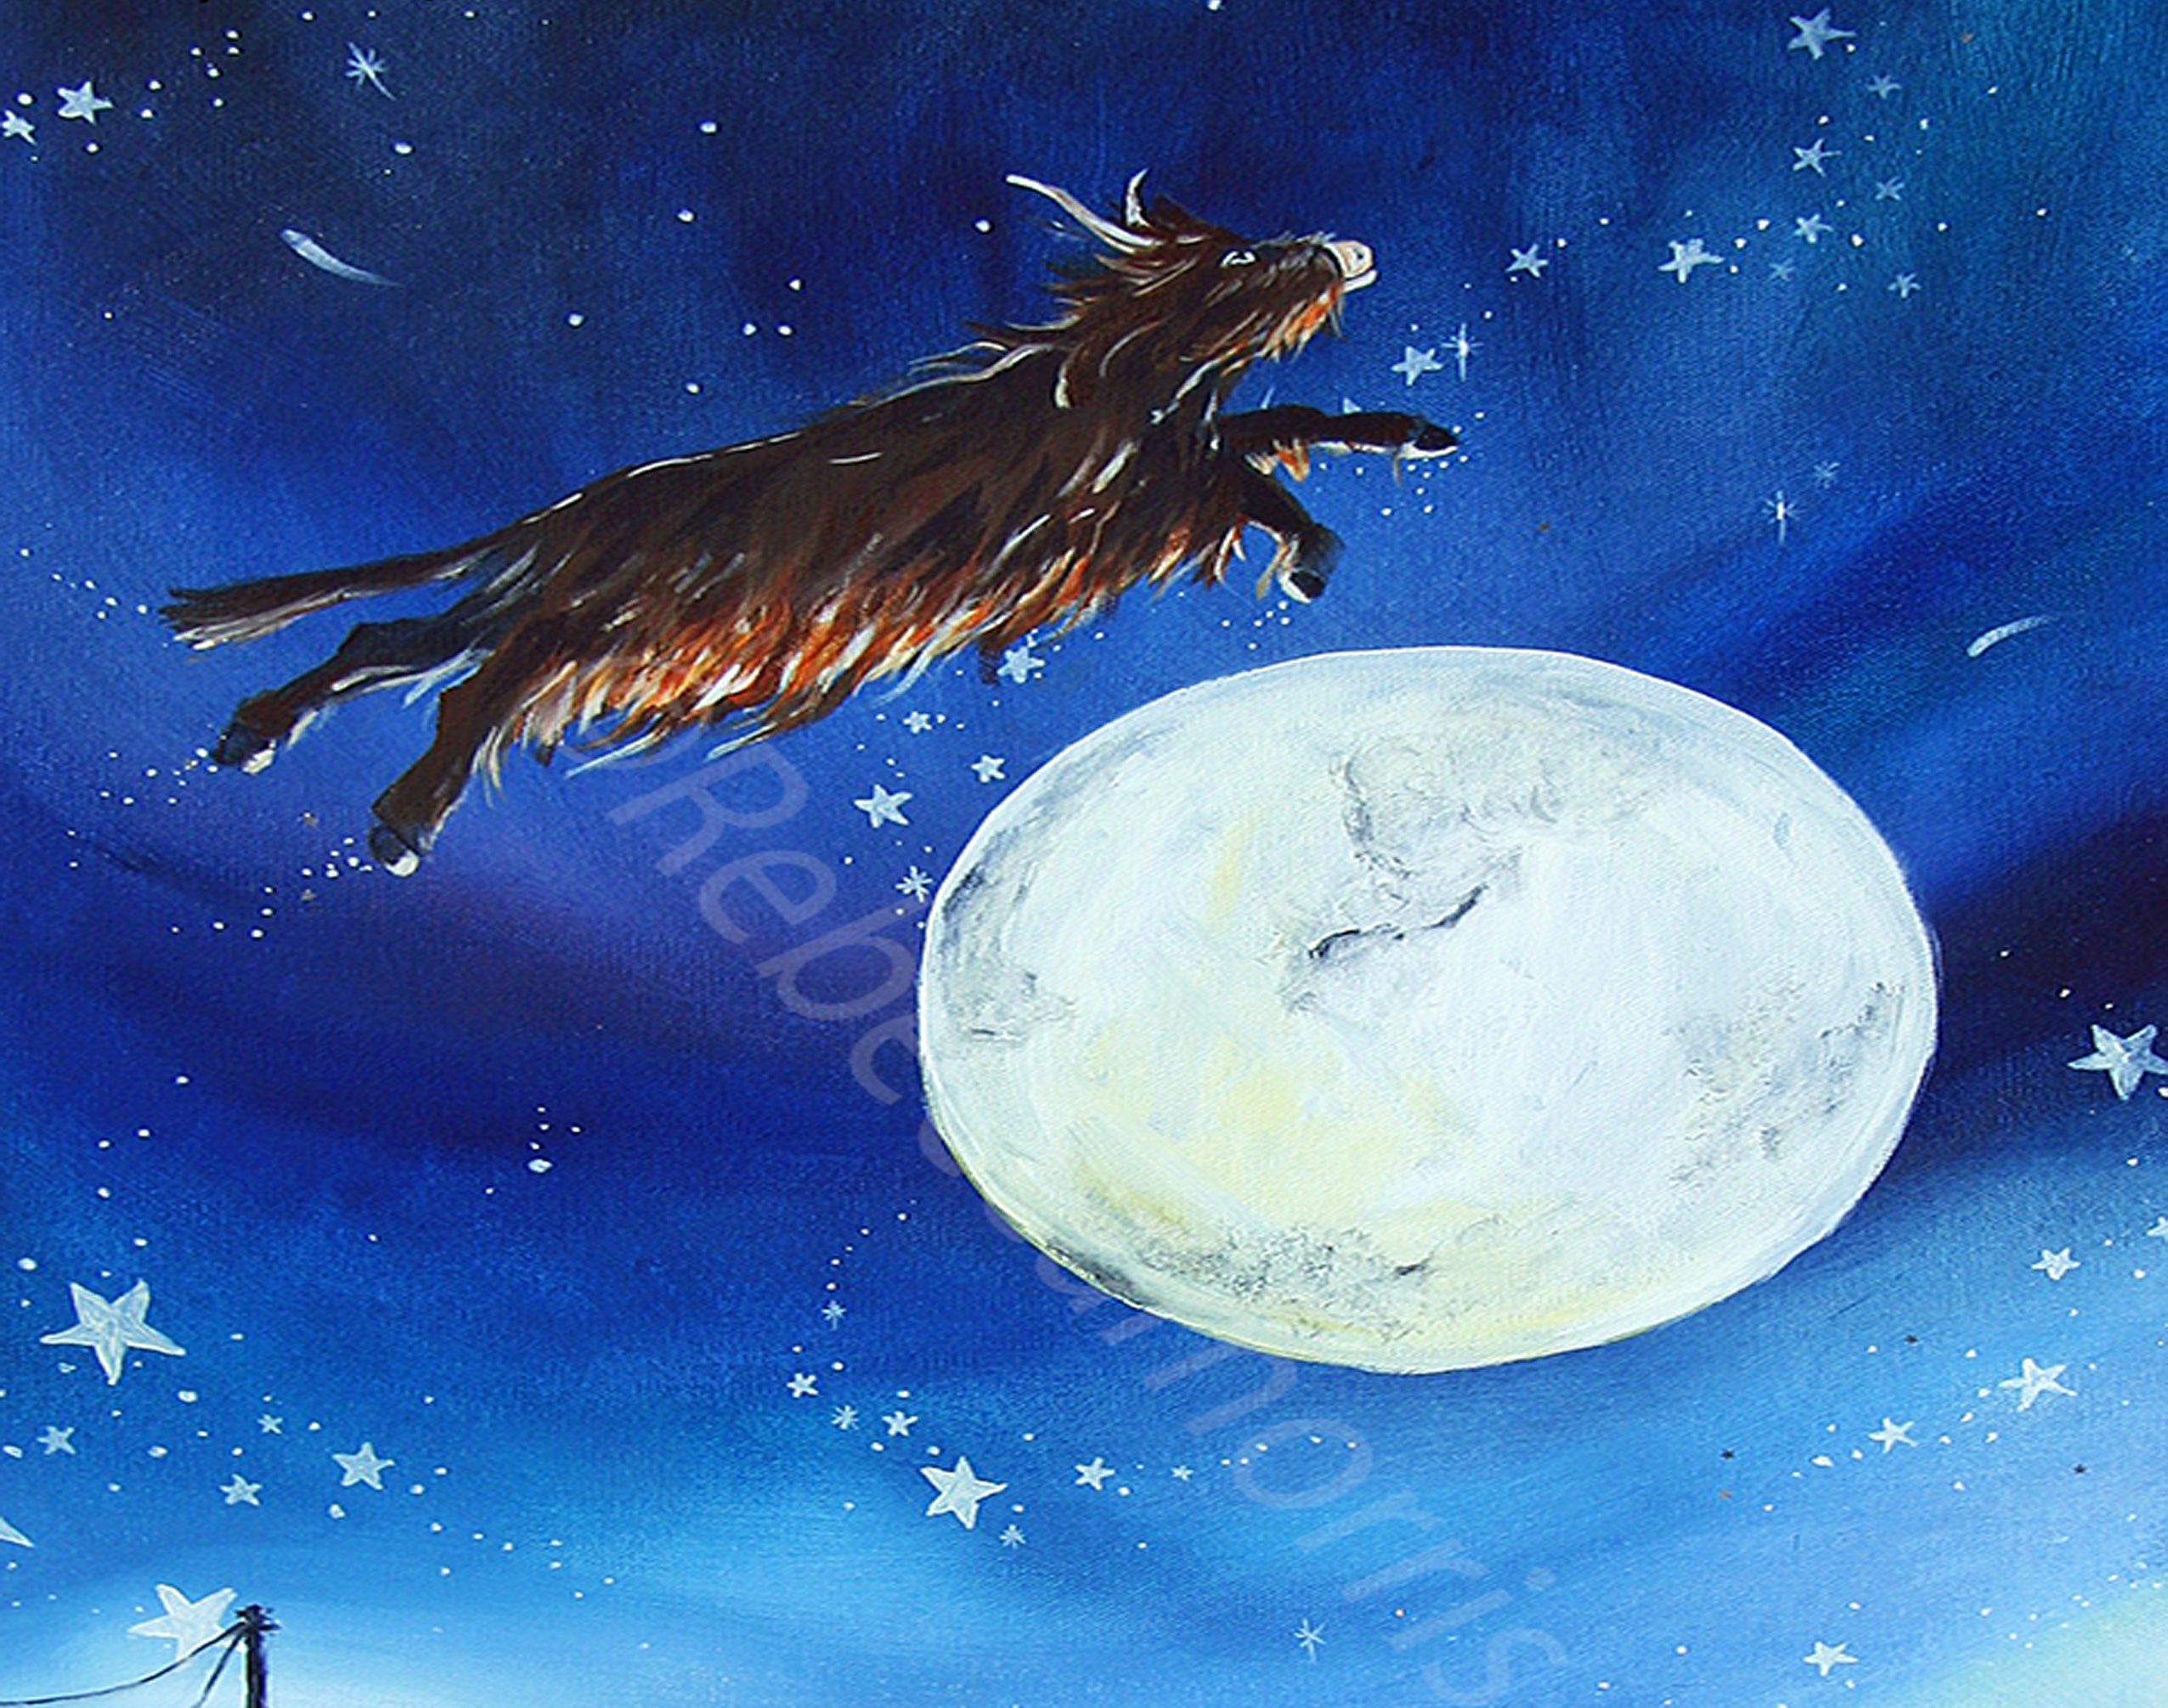 Rebecca Morris Art - The ‘Highland Cow’ jumped over the moon